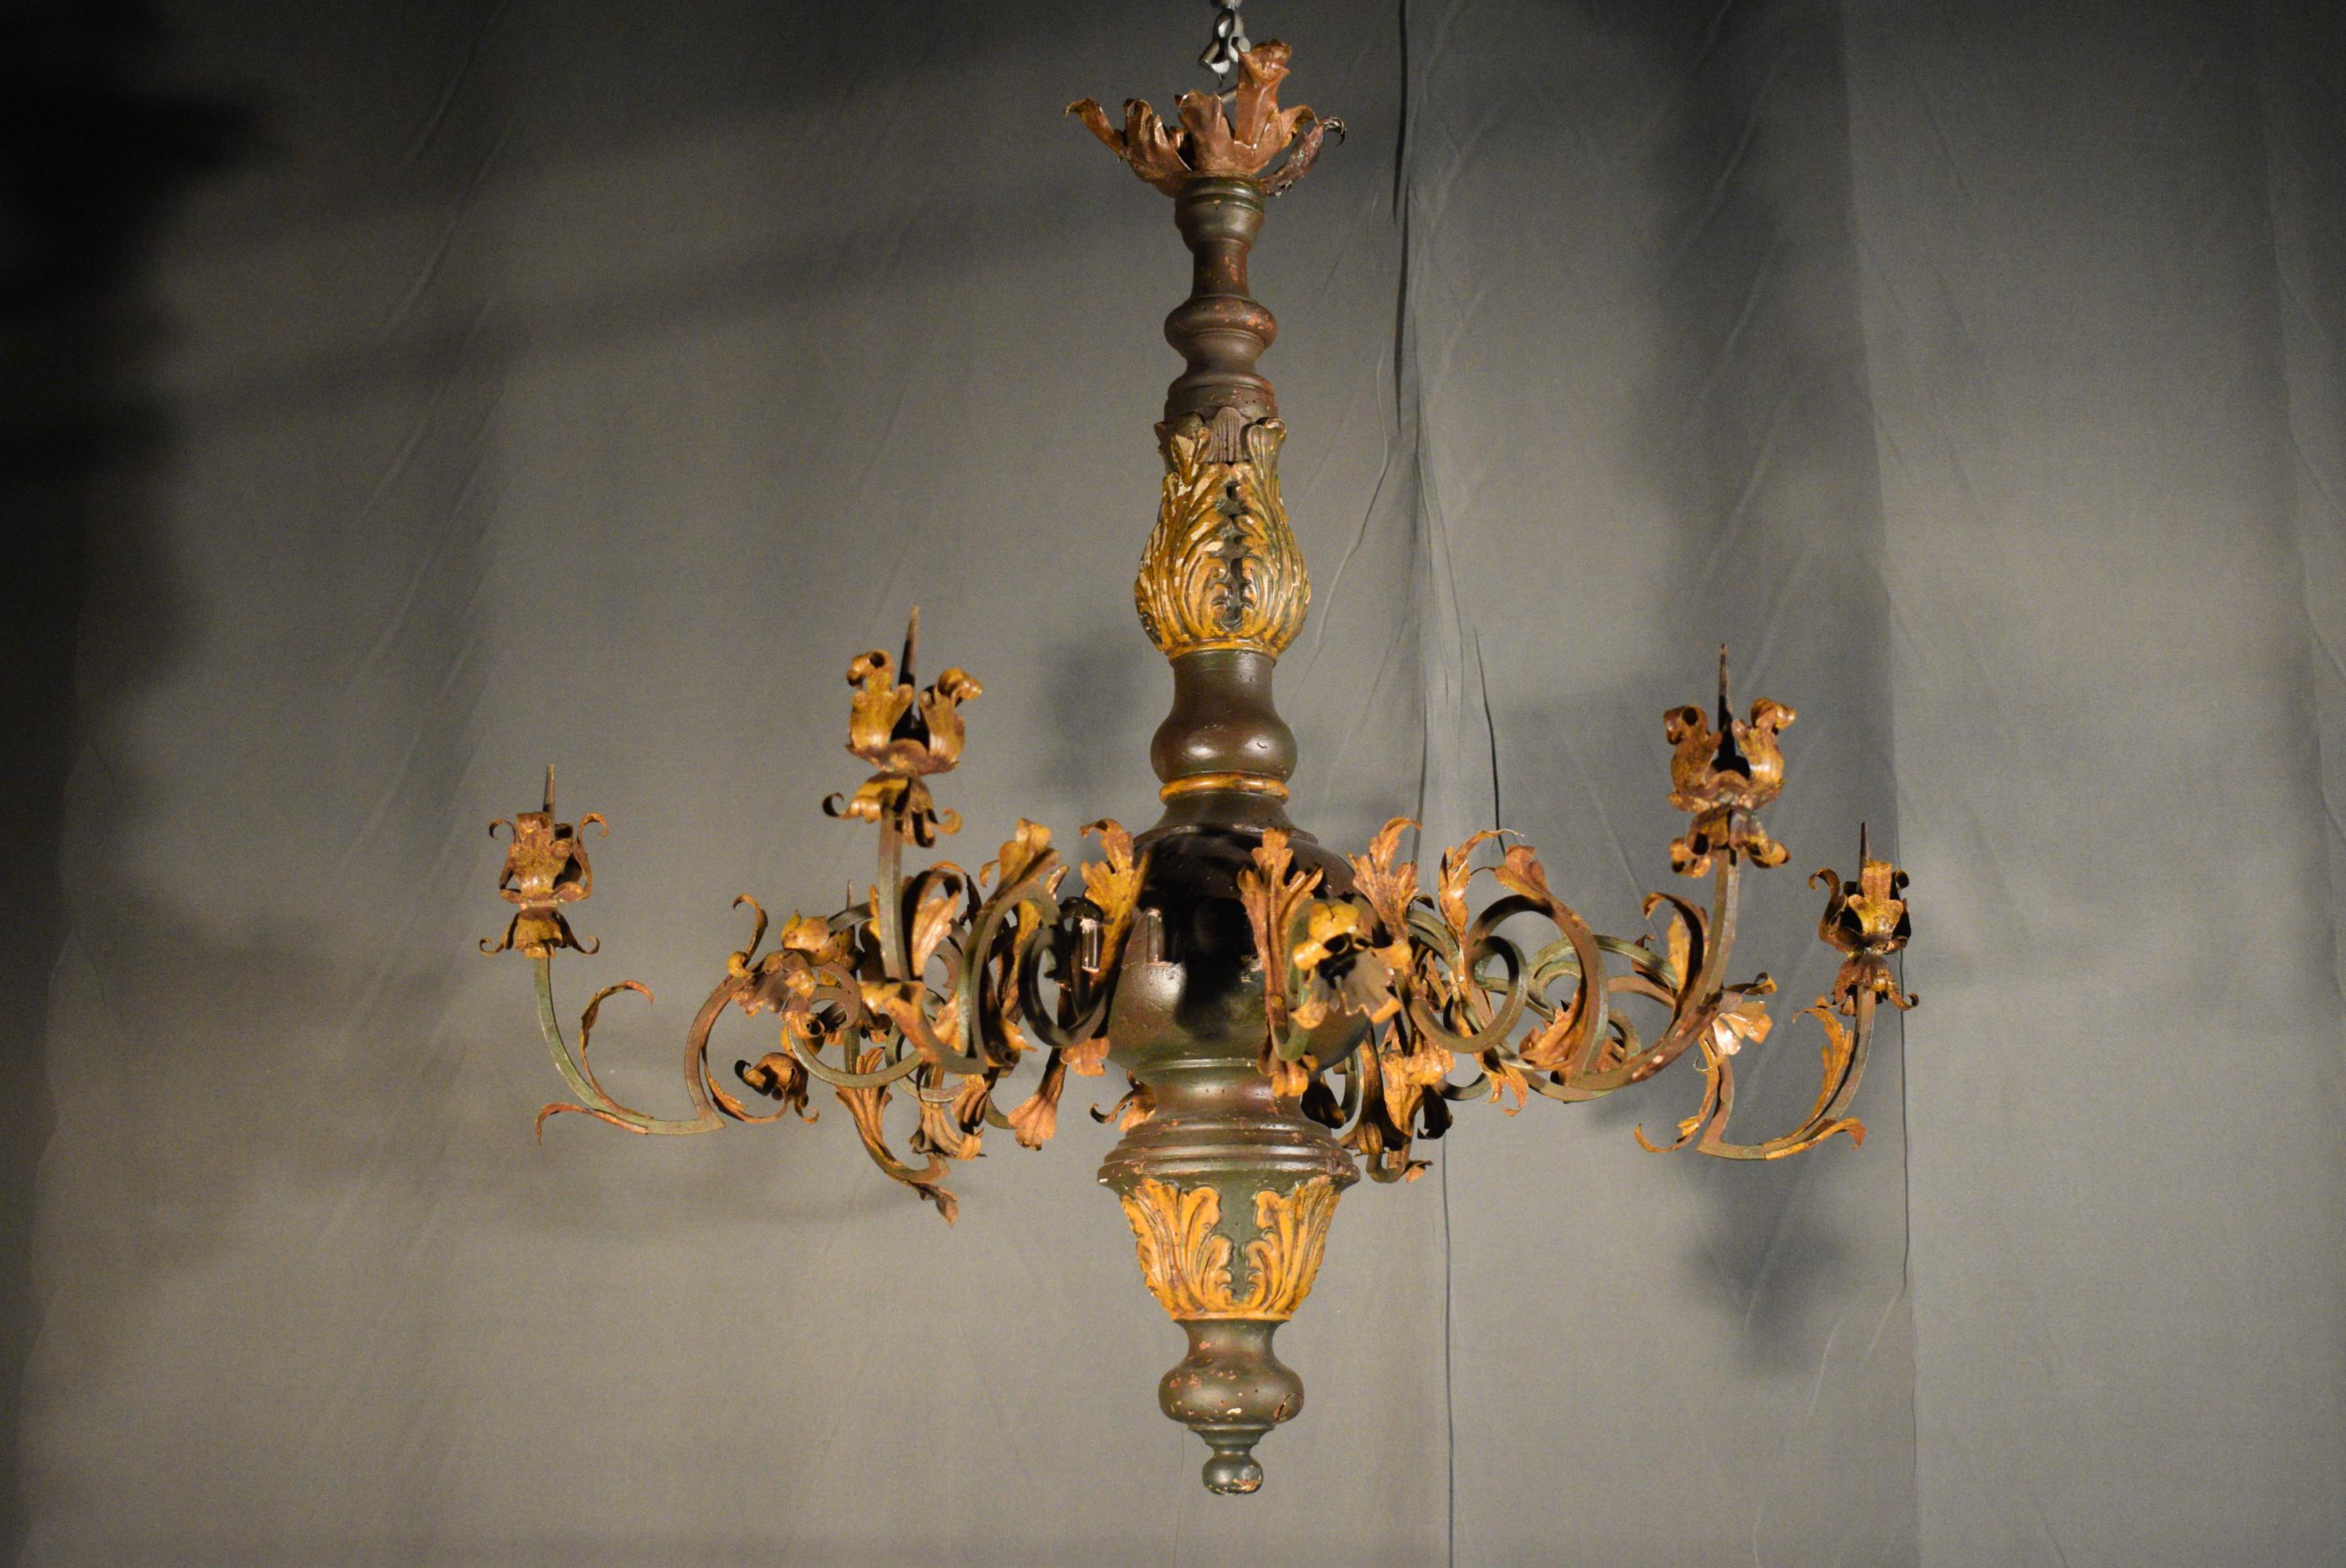 A very fine 18th century Italian chandelier originally for candles. Wood (partially gilt) iron and gilt bronze (top canopy) pair available. A rare find.
Dimensions: Height 33